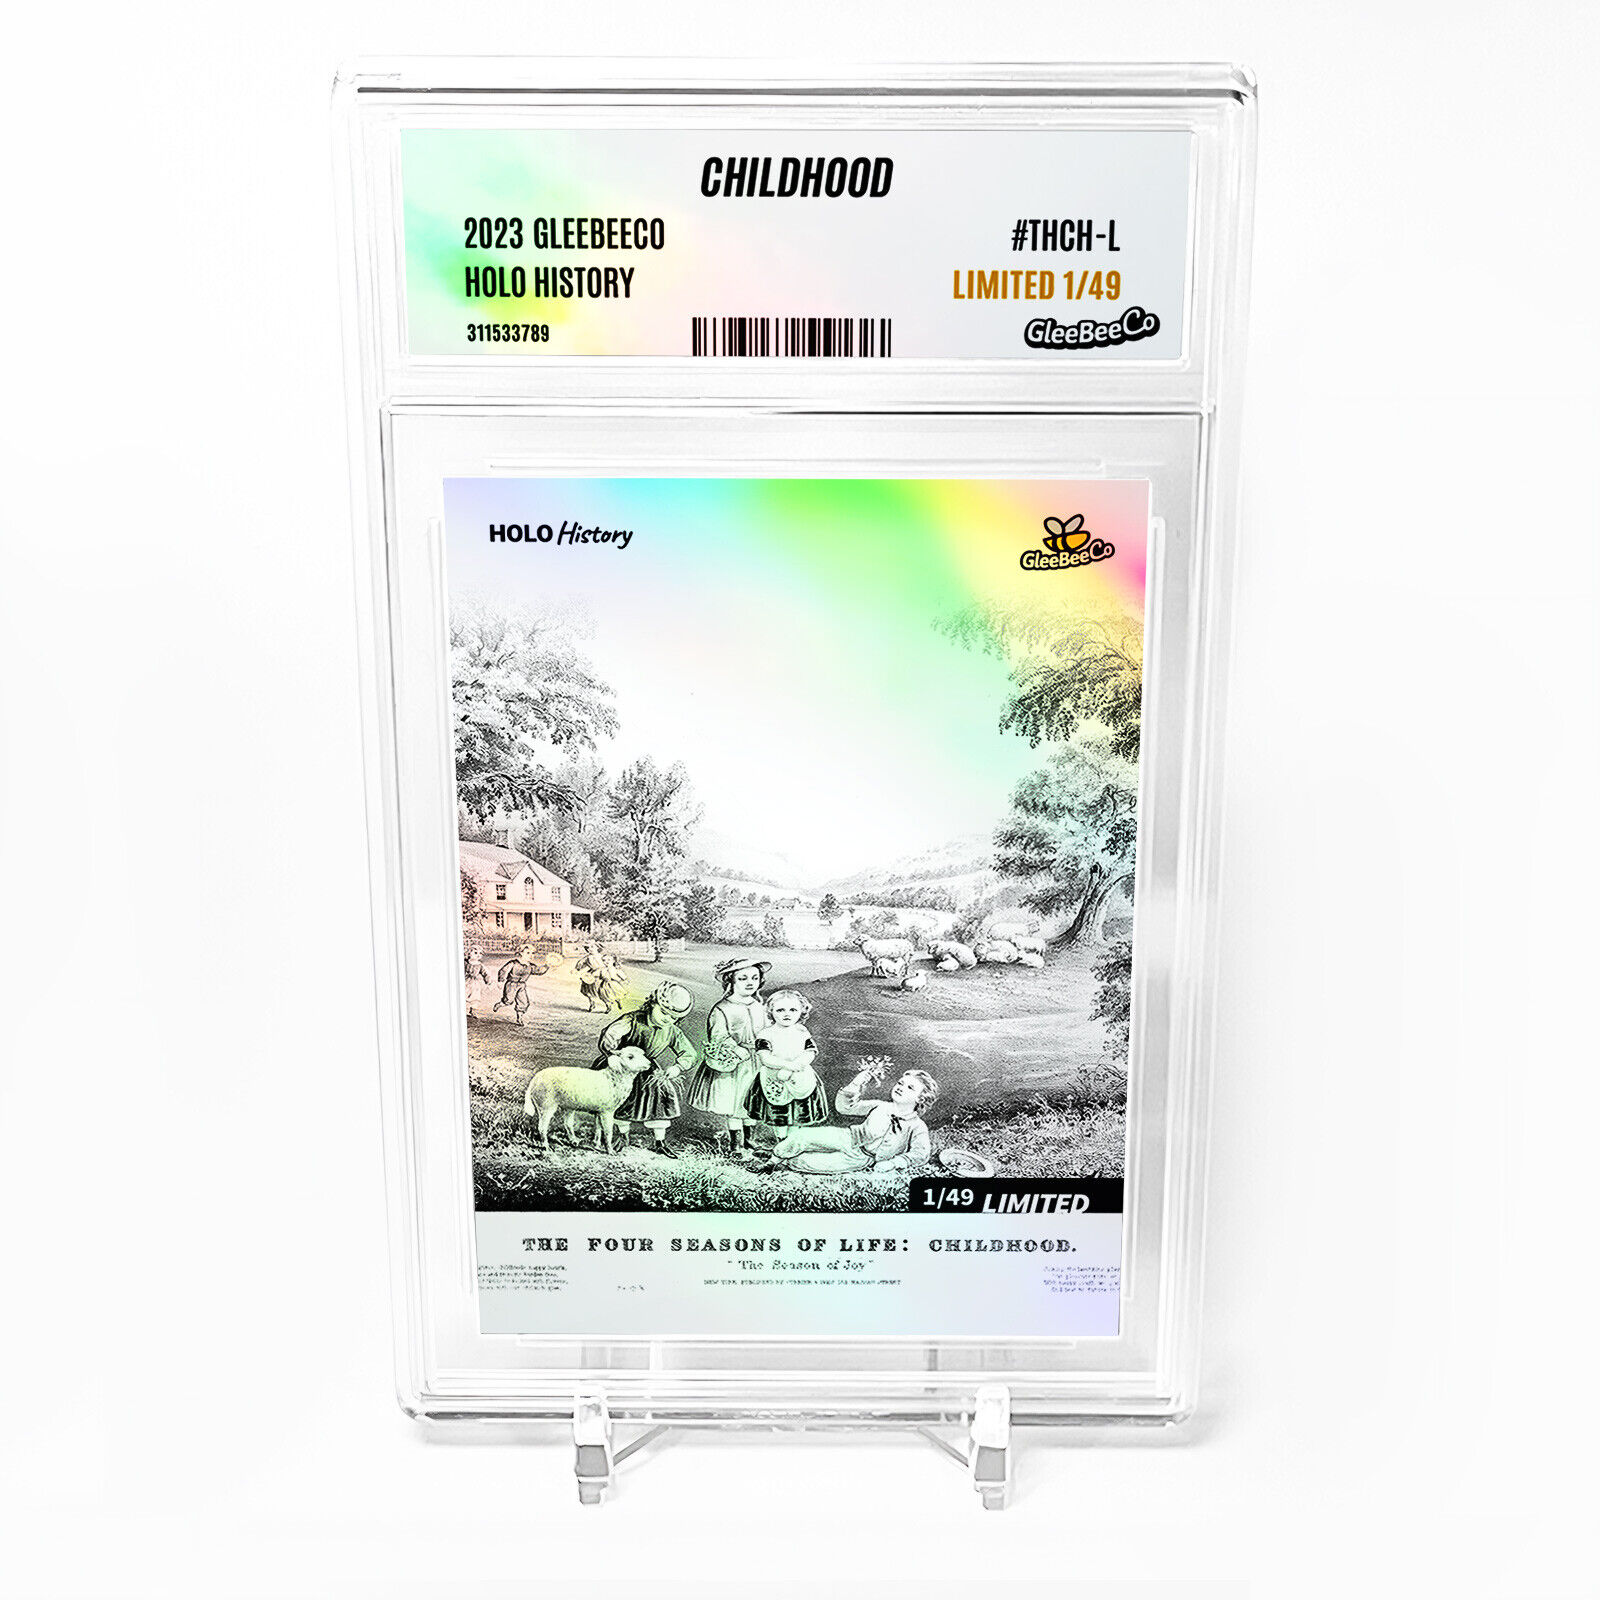 THE FOUR SEASONS OF LIFE Childhood Card 2023 GleeBeeCo Holo History #THCH-L /49